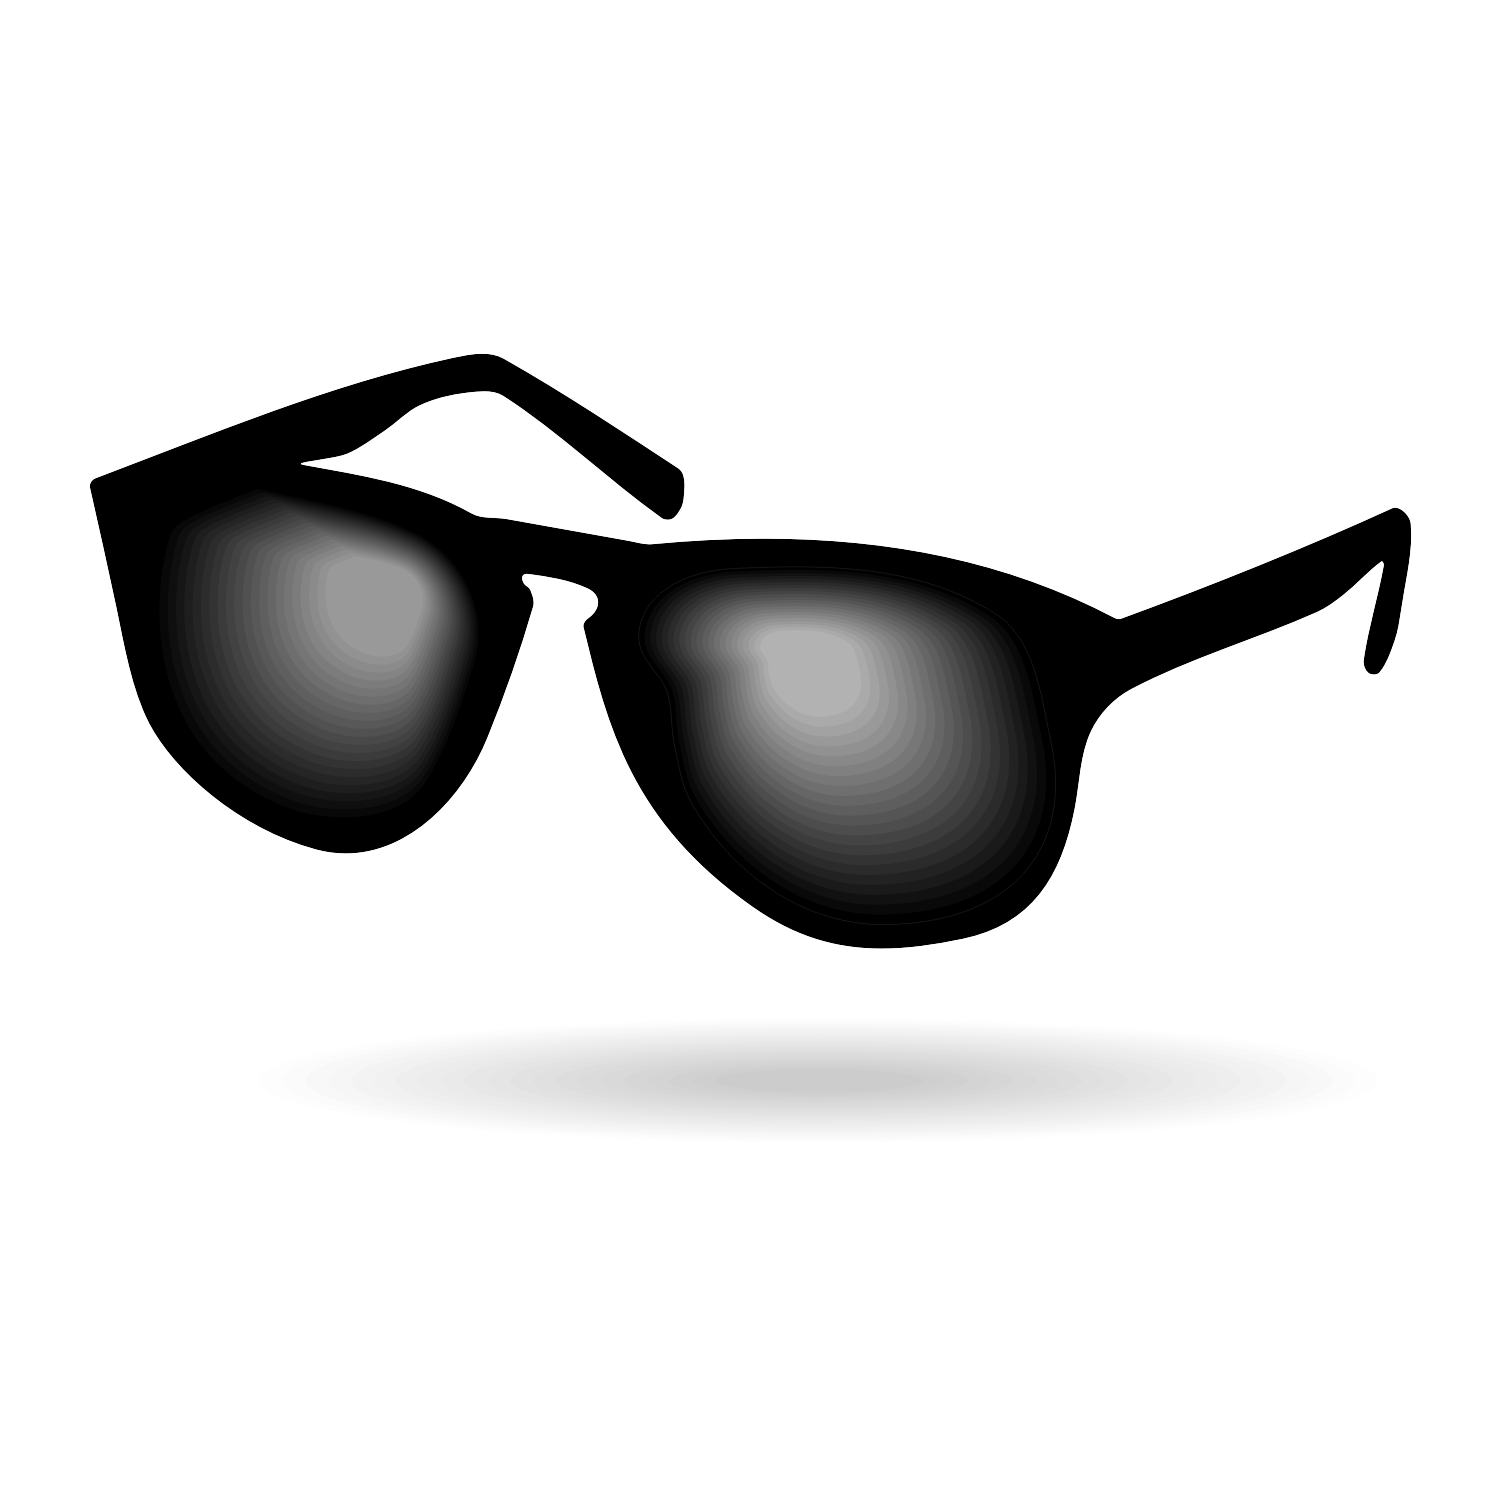 vector free download glasses - photo #50